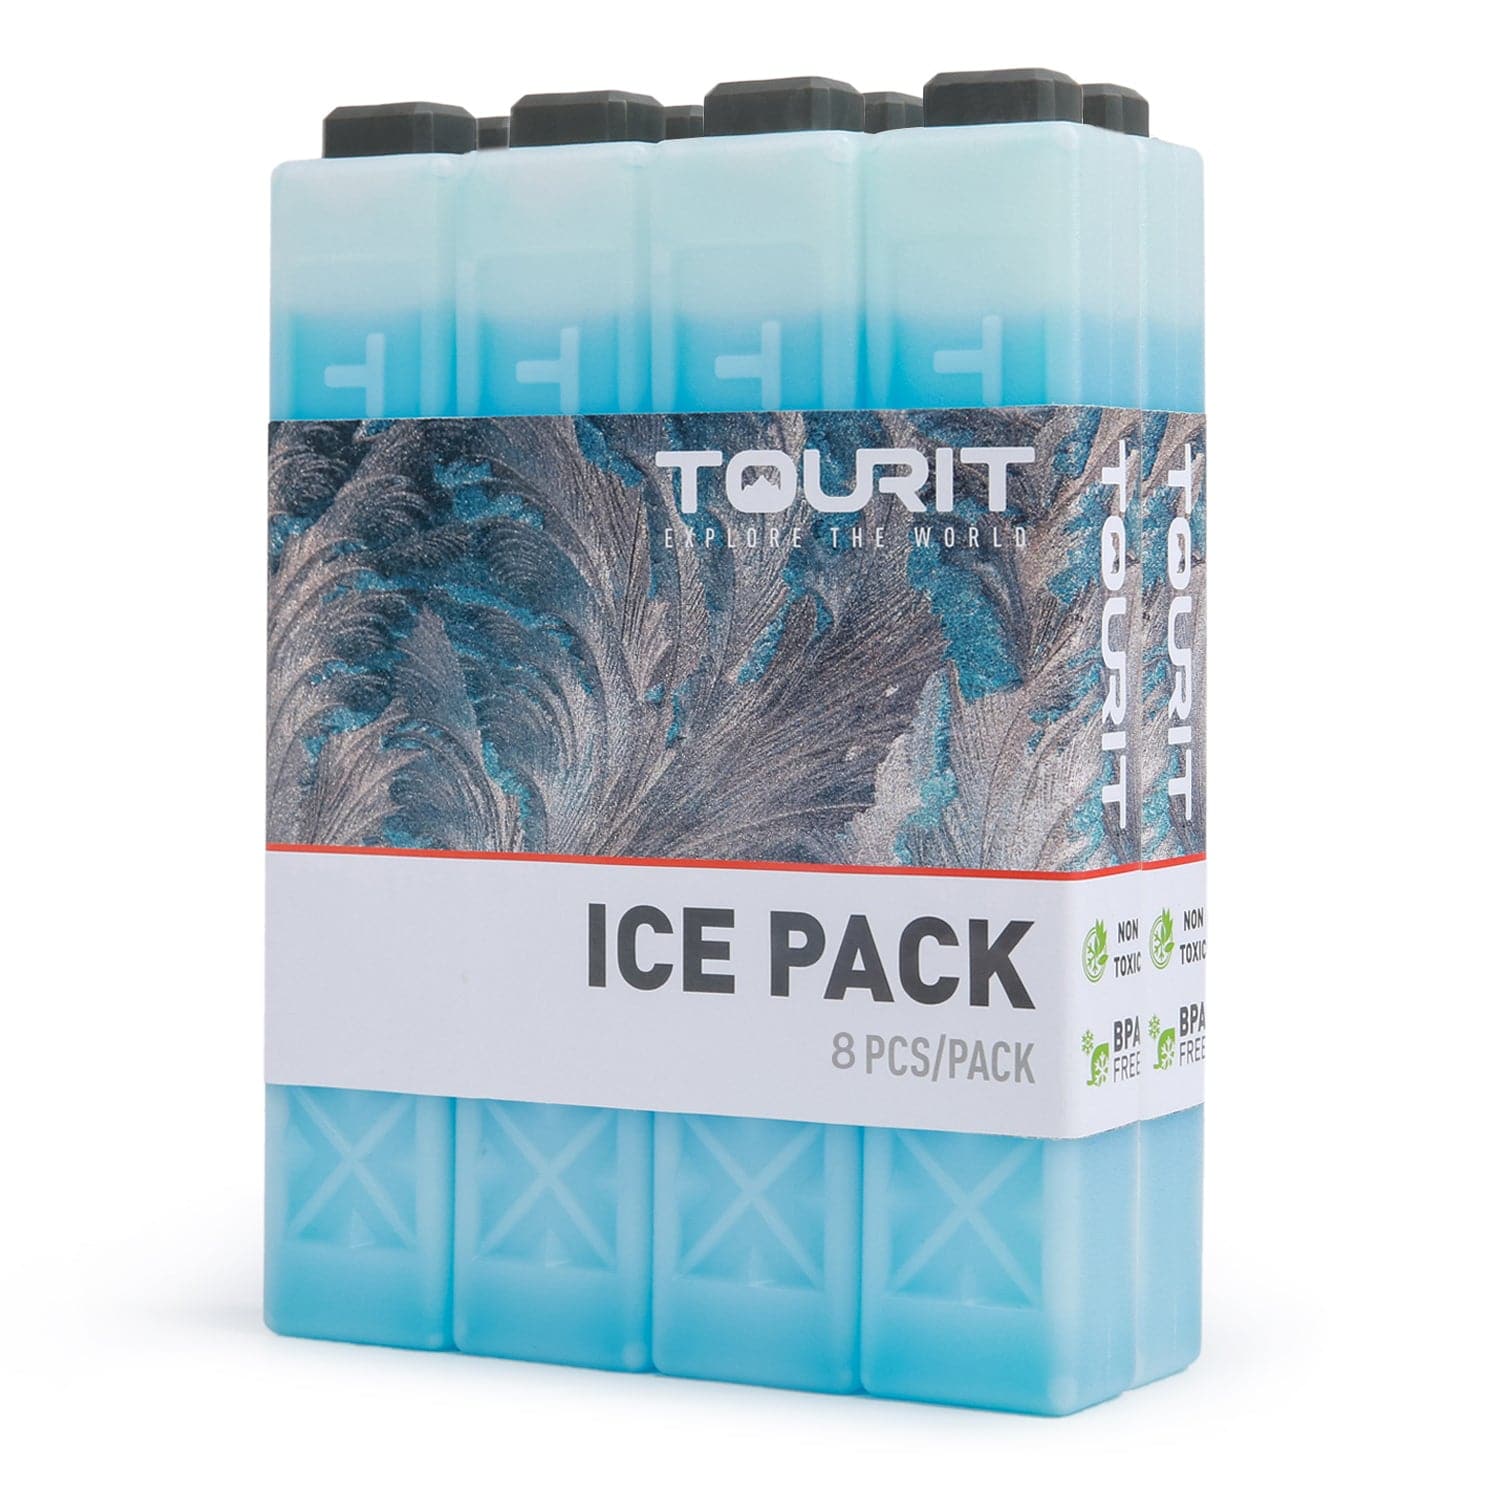 Large Reusable Ice Pack for Coolers Thin Freezer Packs-10 x 2 Pack gray